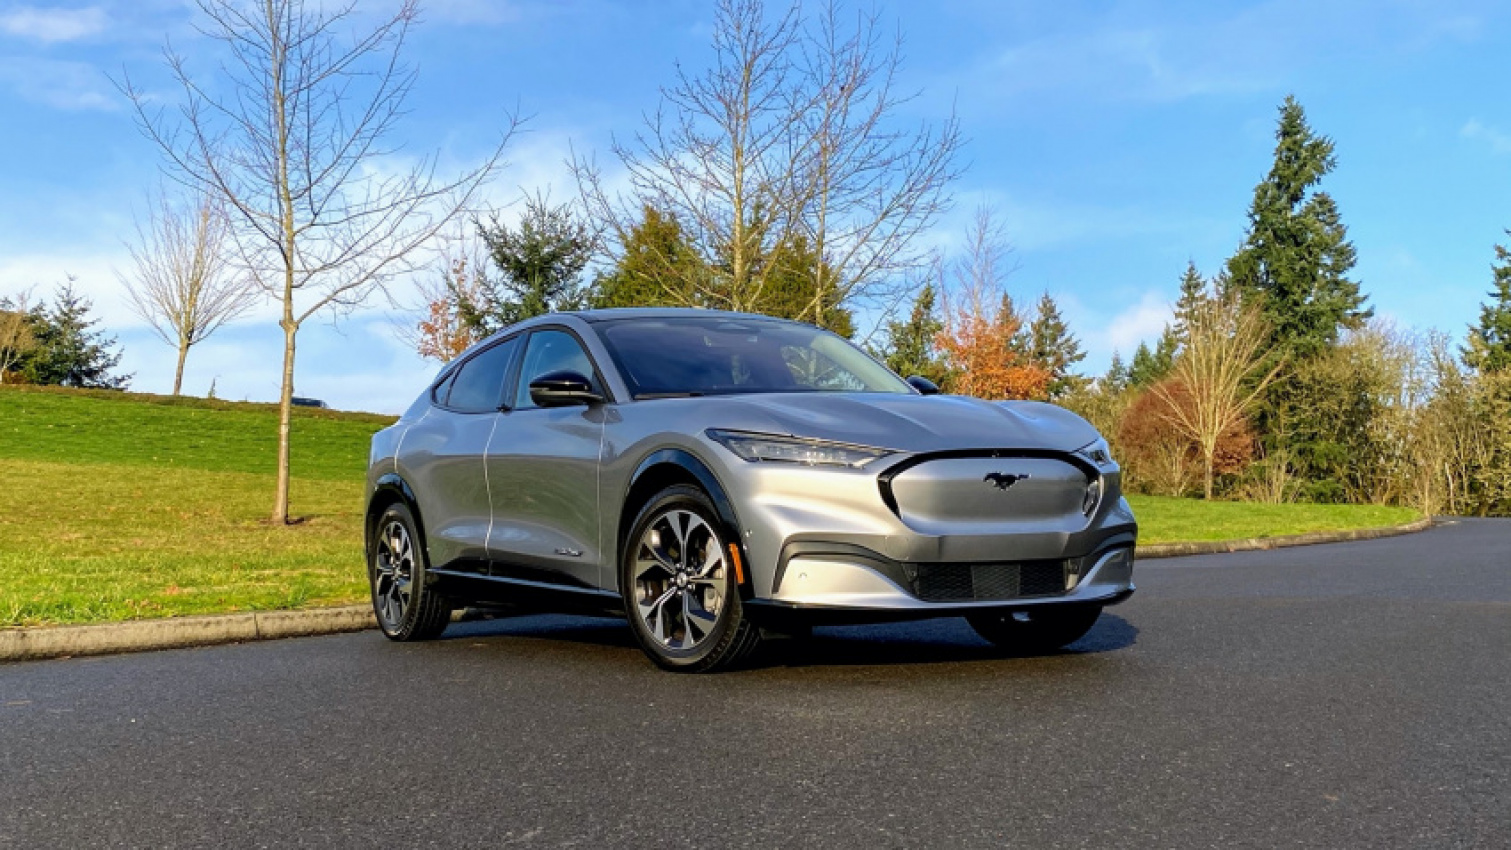 autos, cars, ford, amazon, electric cars, first drives, ford mustang, ford mustang mach-e news, ford news, amazon, first drive review: 2021 ford mustang mach-e electric suv redefines the pony car